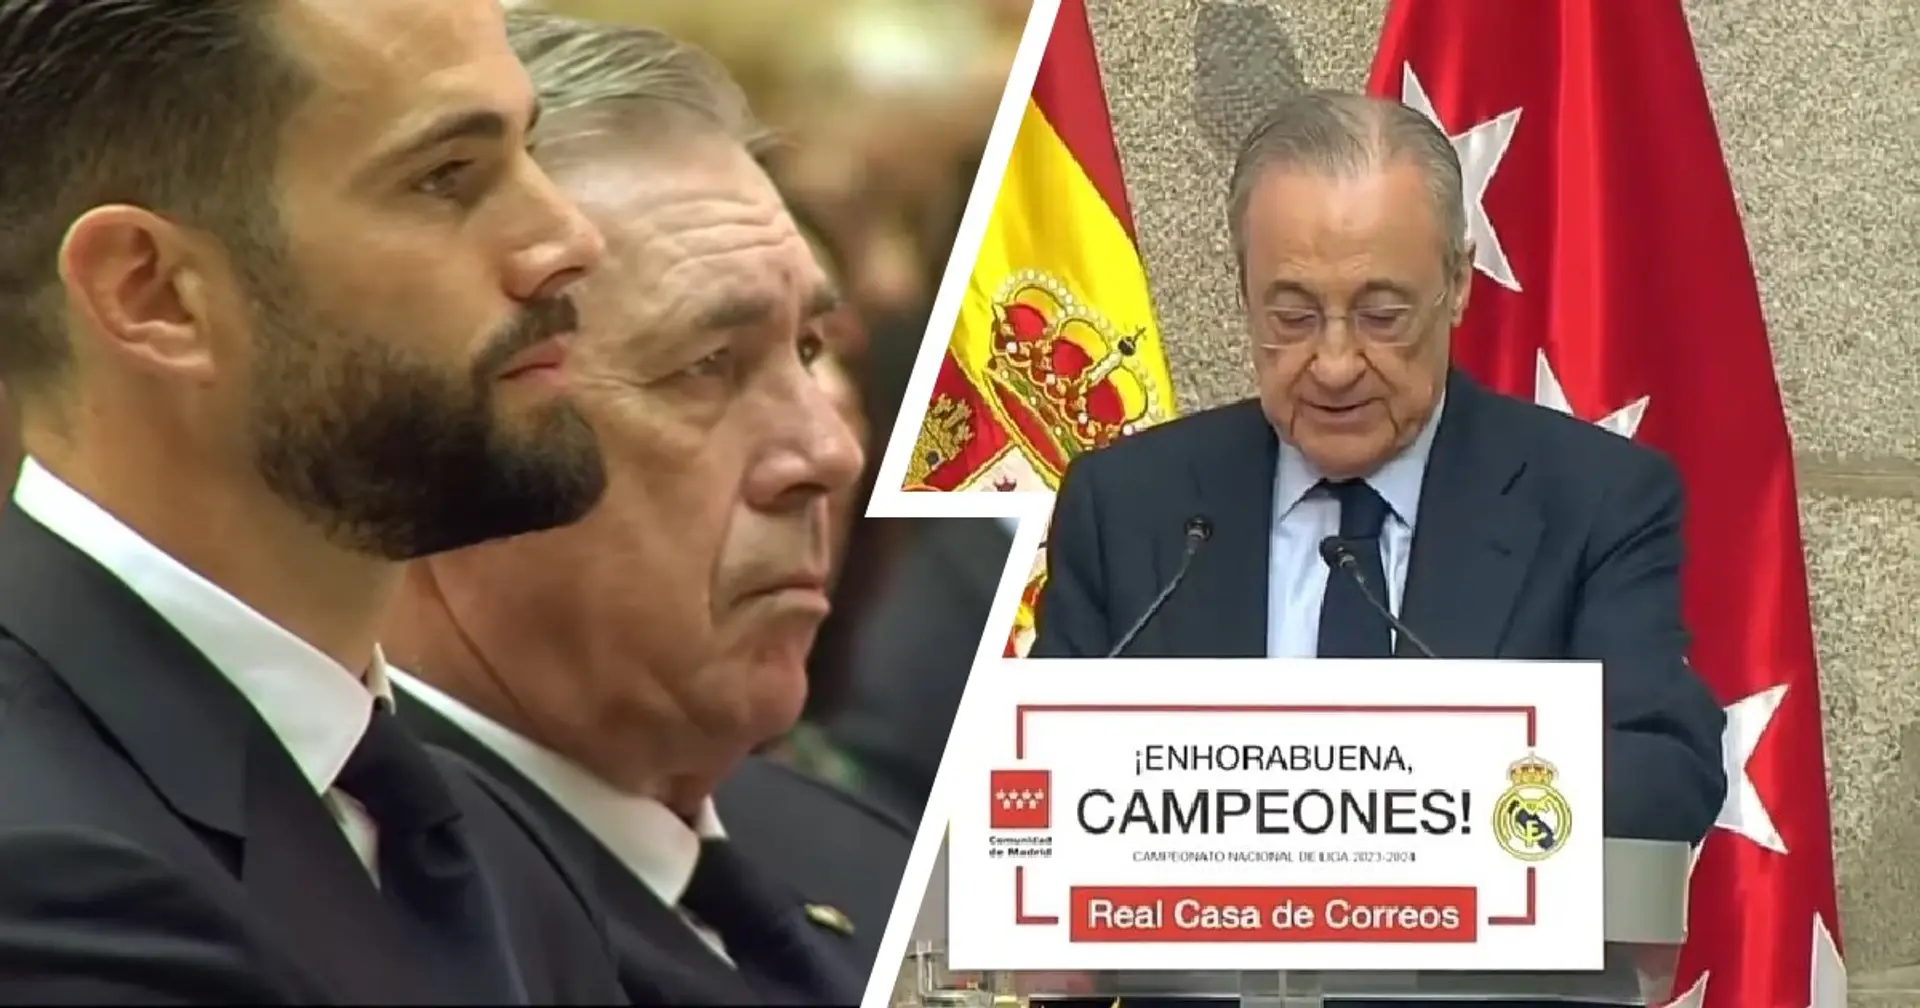 Florentino Perez rates Carlo Ancelotti among Real Madrid's greatest managers